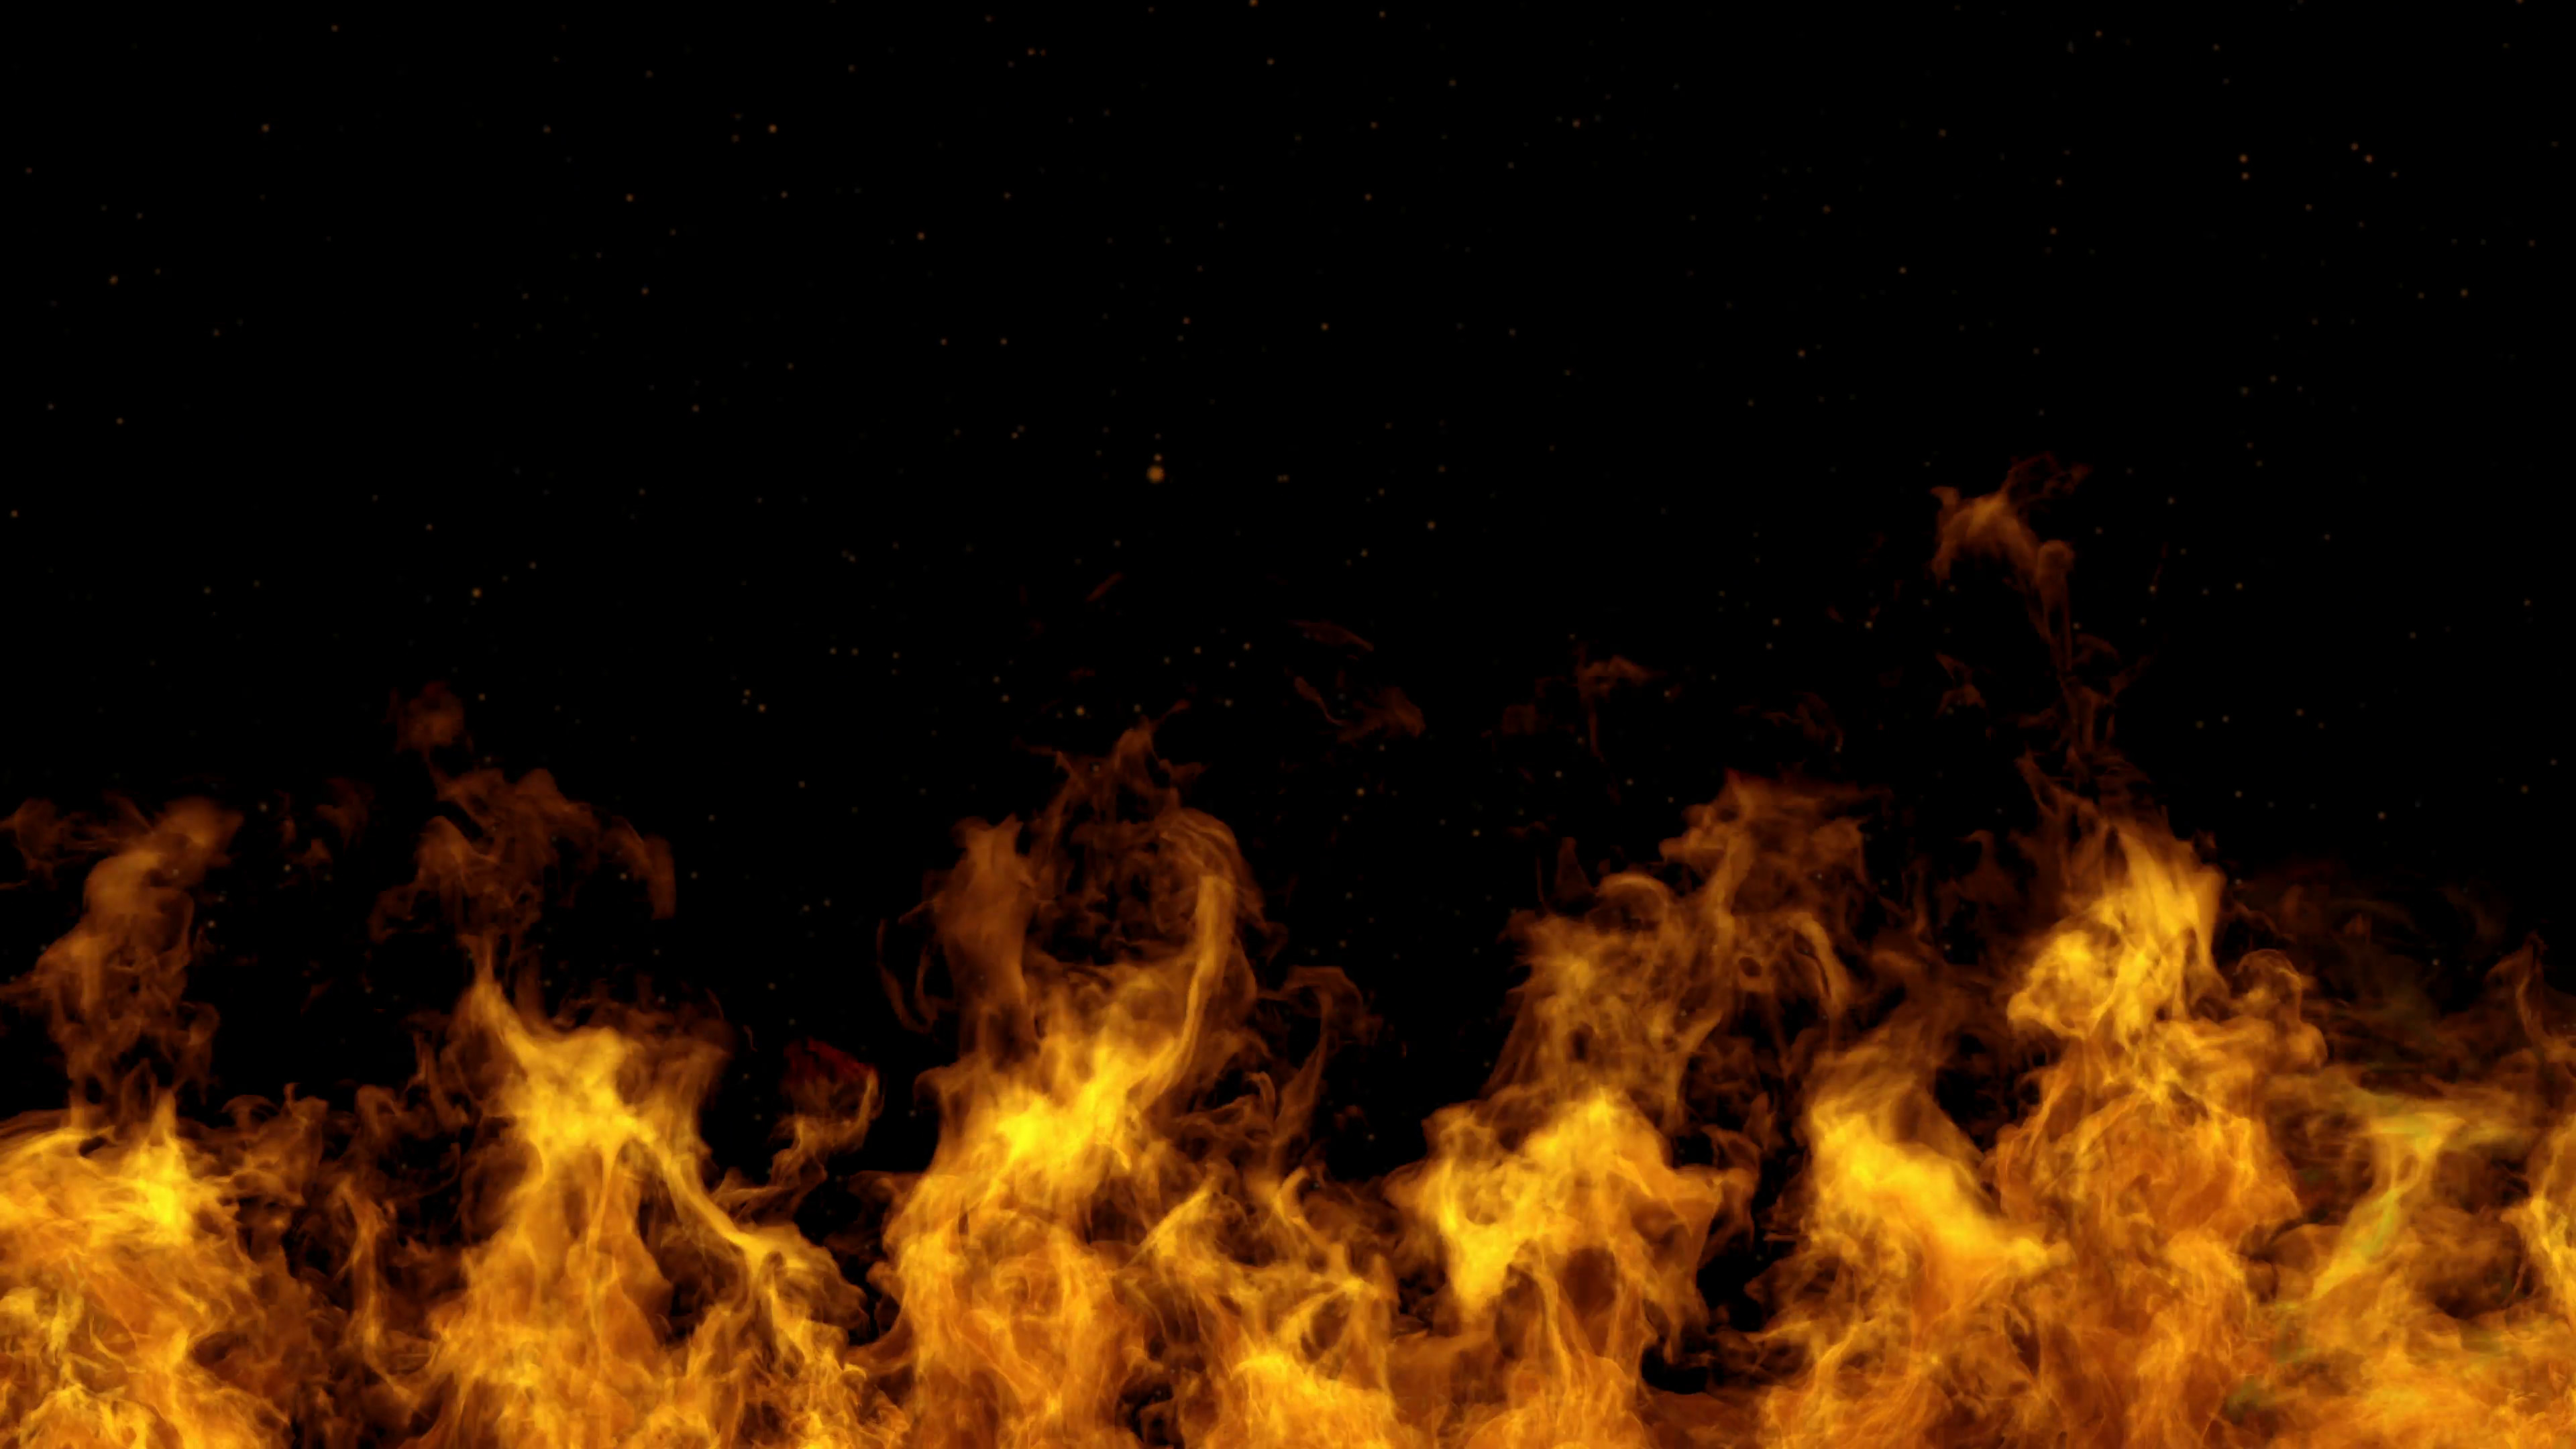 Fire Background Images (59+ images)